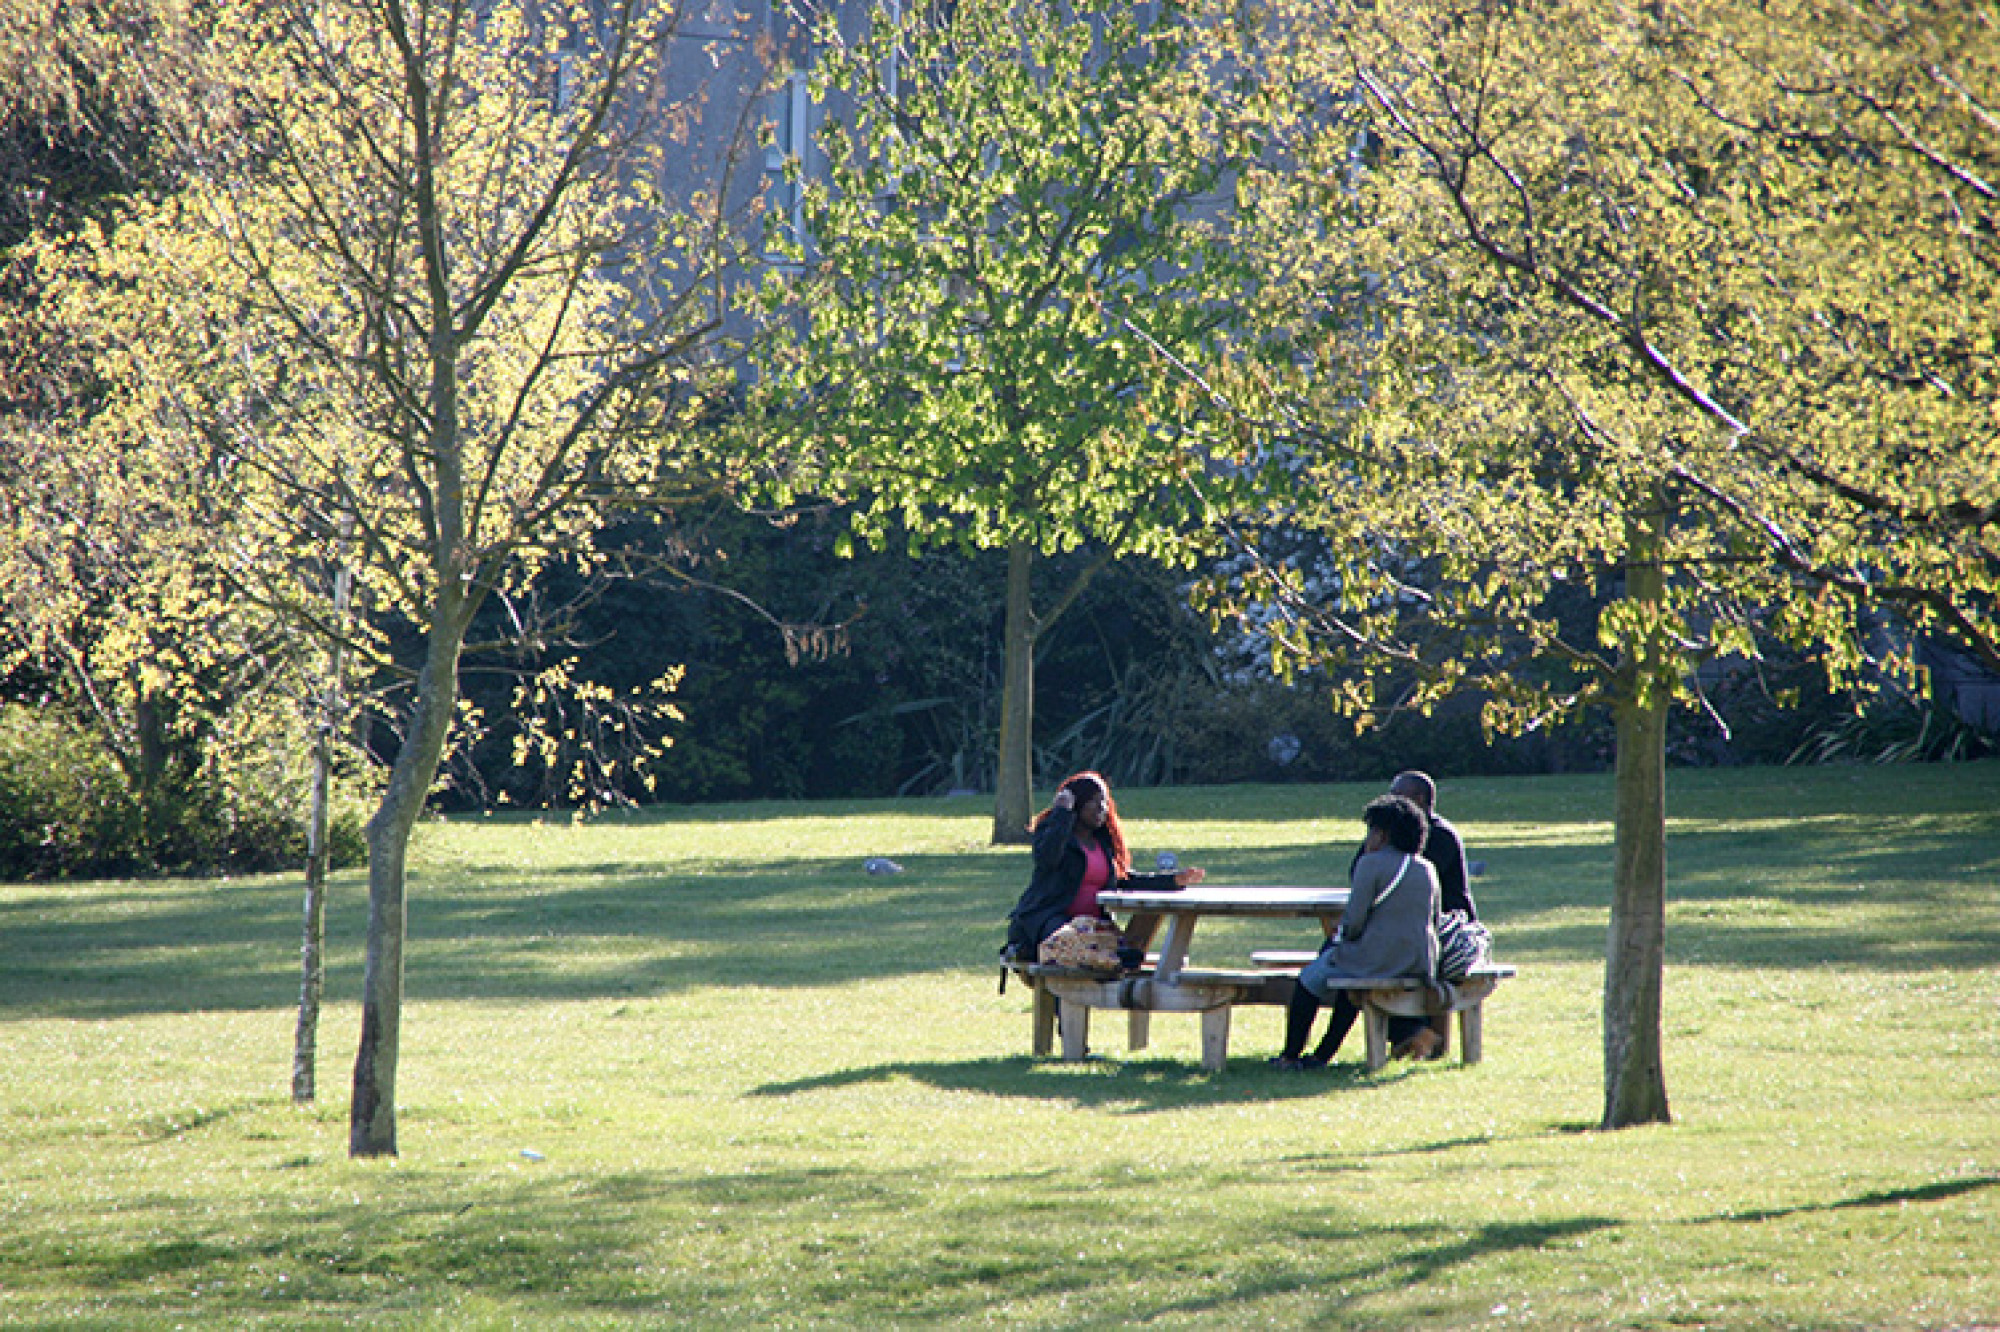 Students sitting on bench chatting